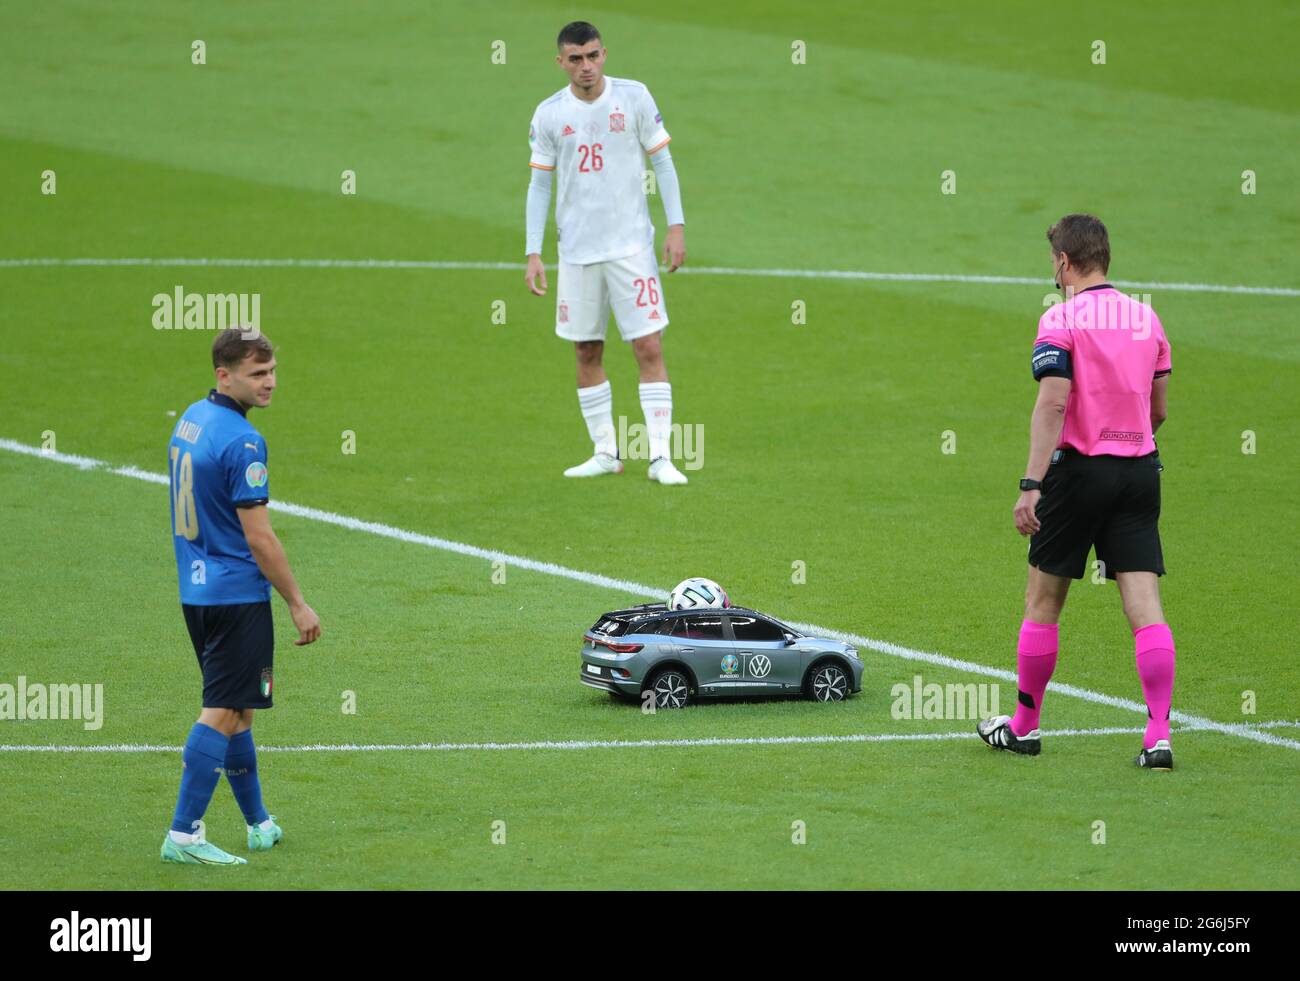 MODEL CAR BRINGS OUT MATCH BALL, ITALY V SPAIN, 2021 Stock Photo